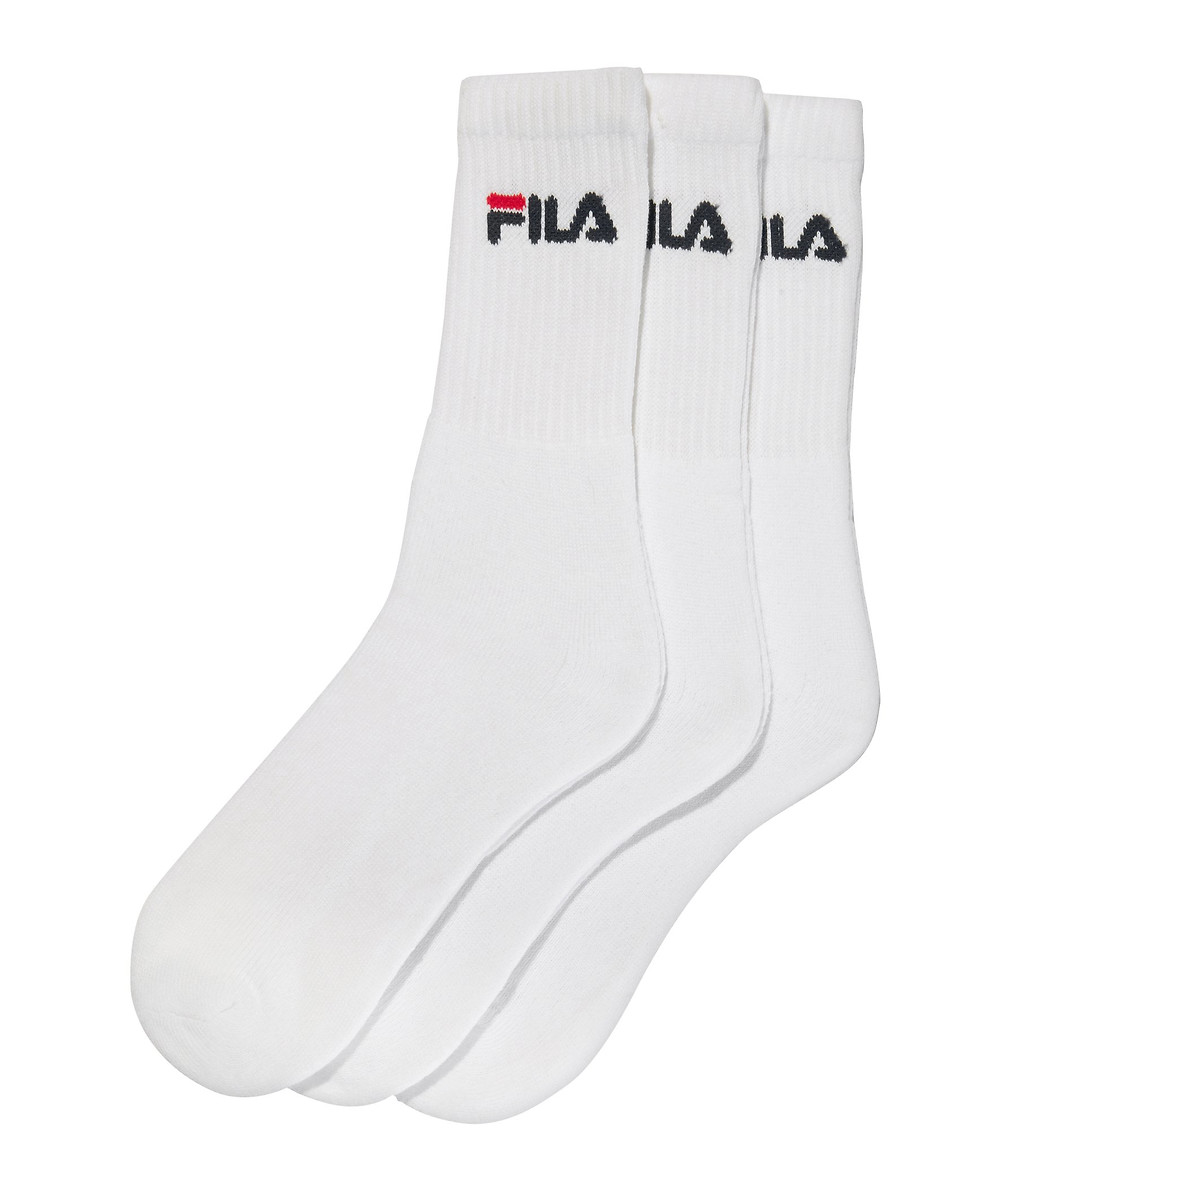 Image of Pack of 3 Pairs of Long Socks